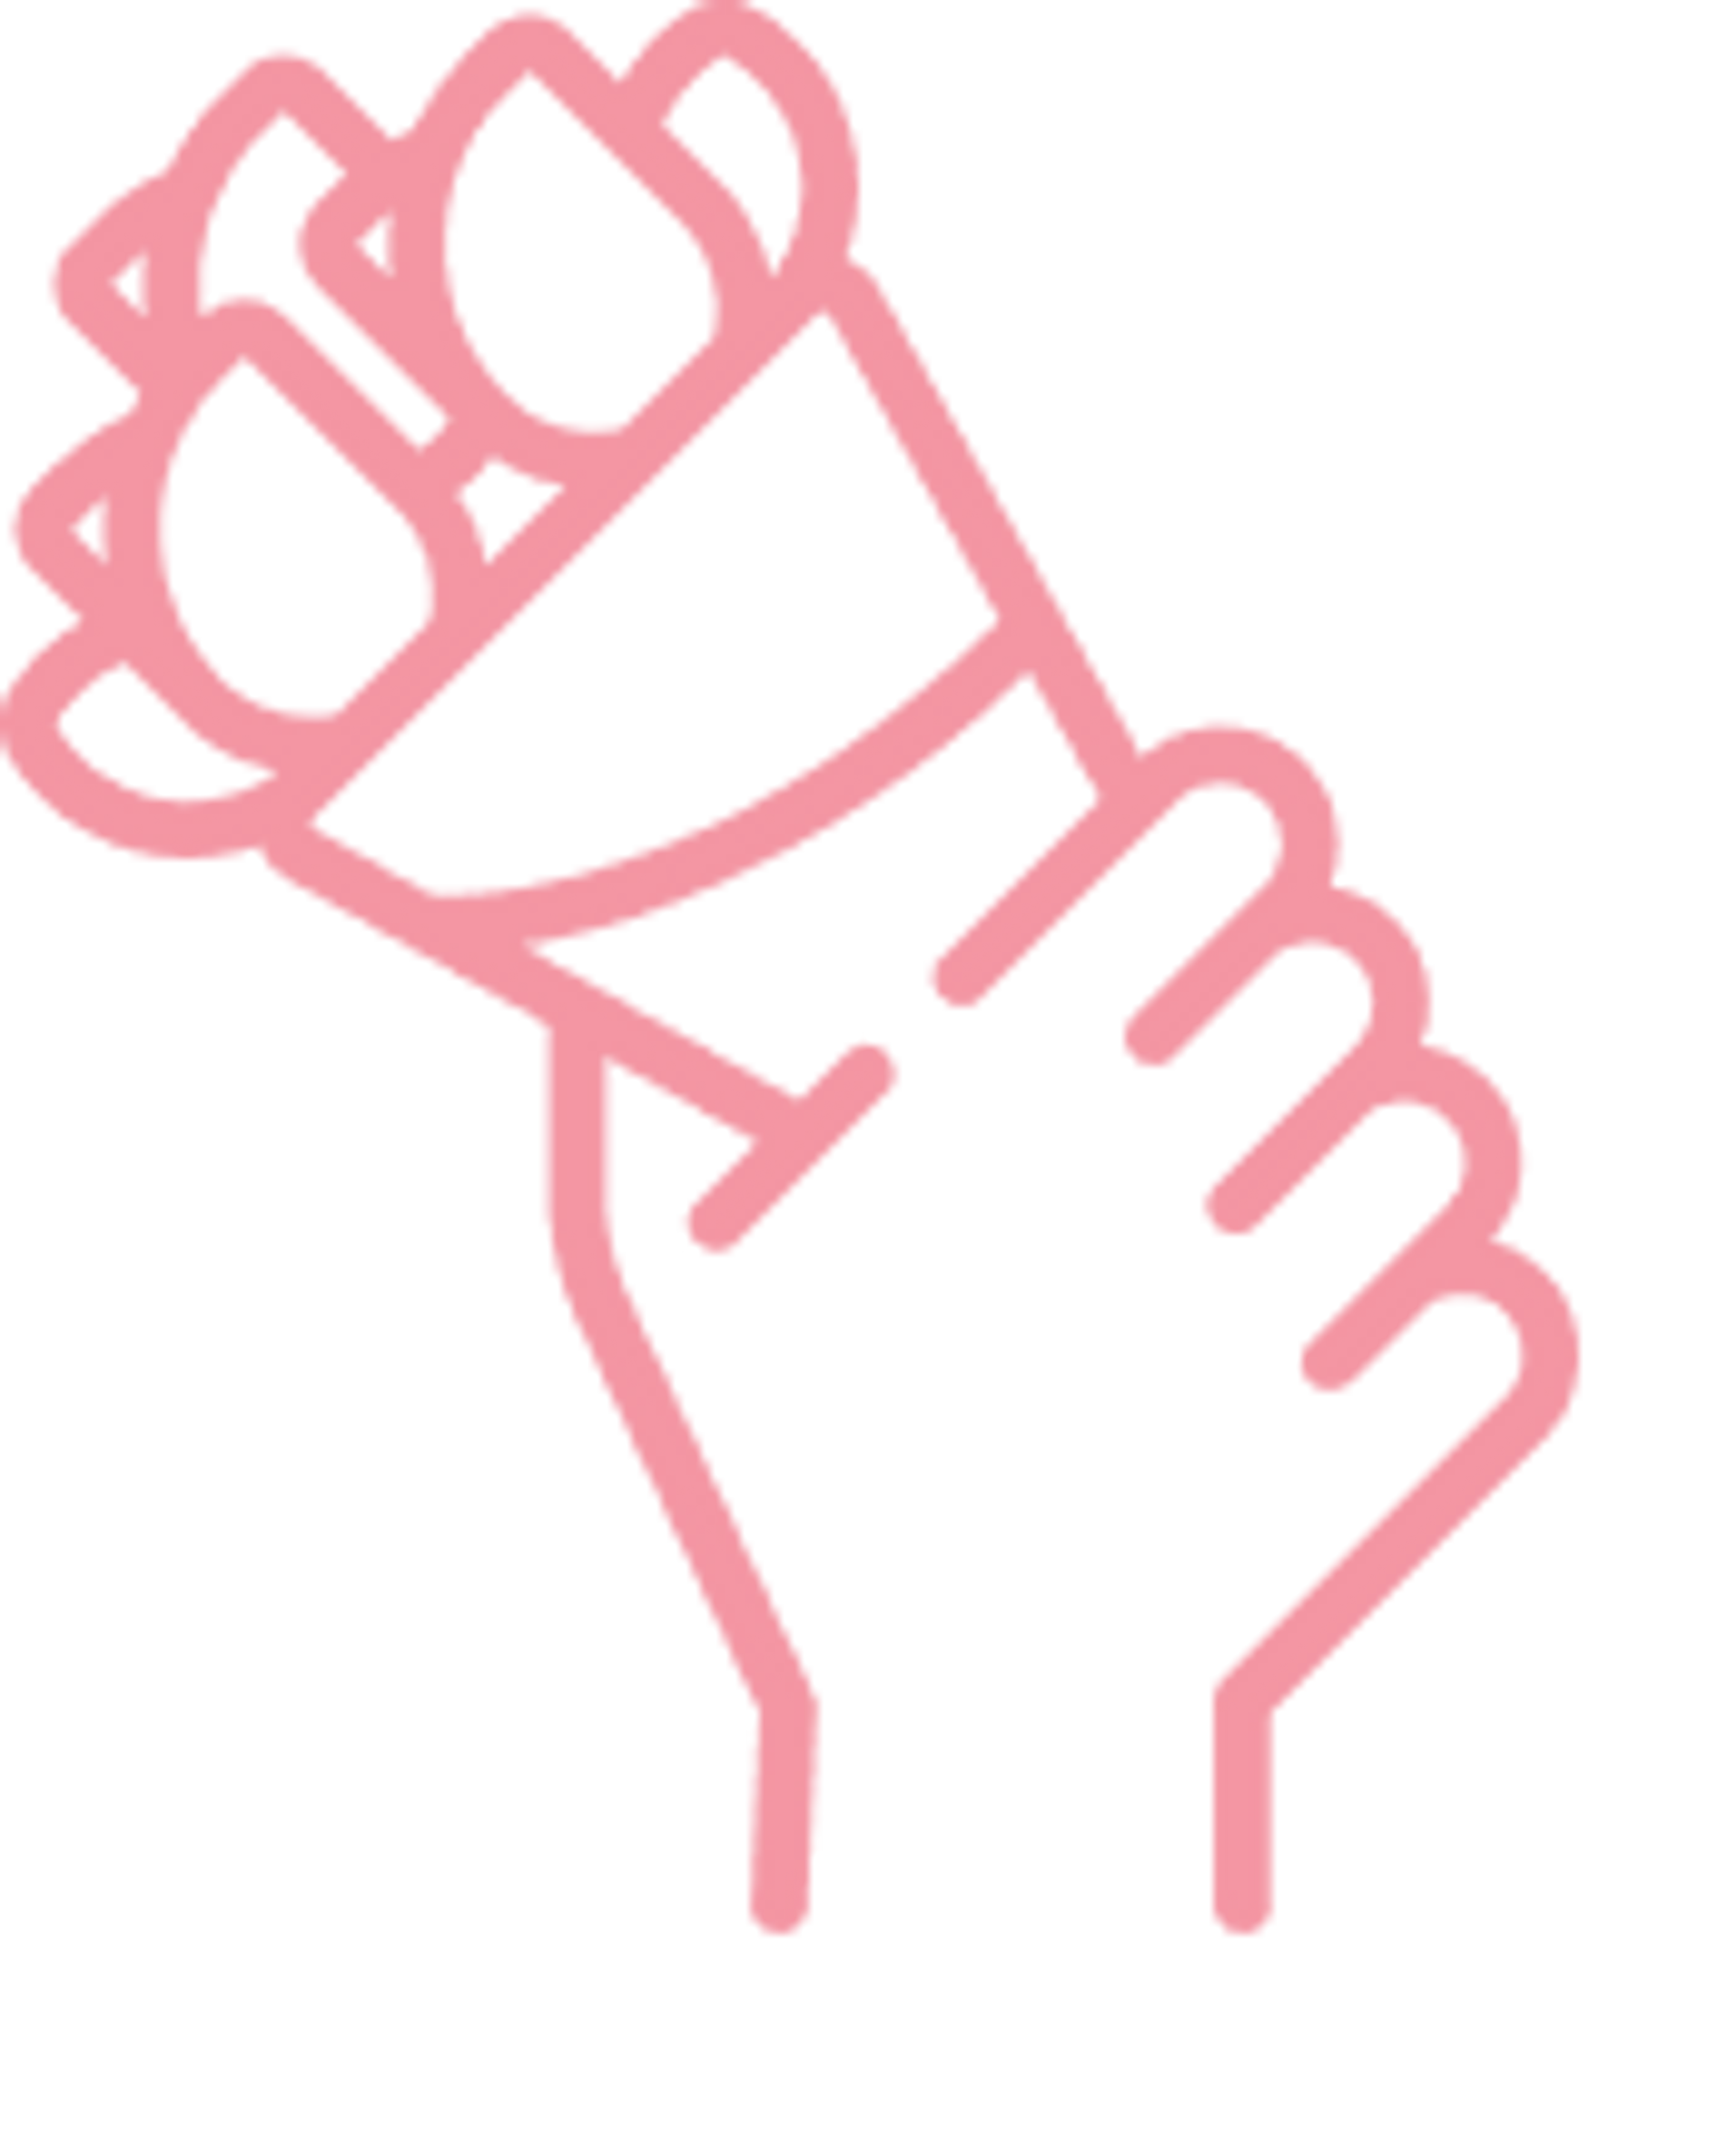 Icon of a hand holding a bouquet of flowers to denote "hand delivered"